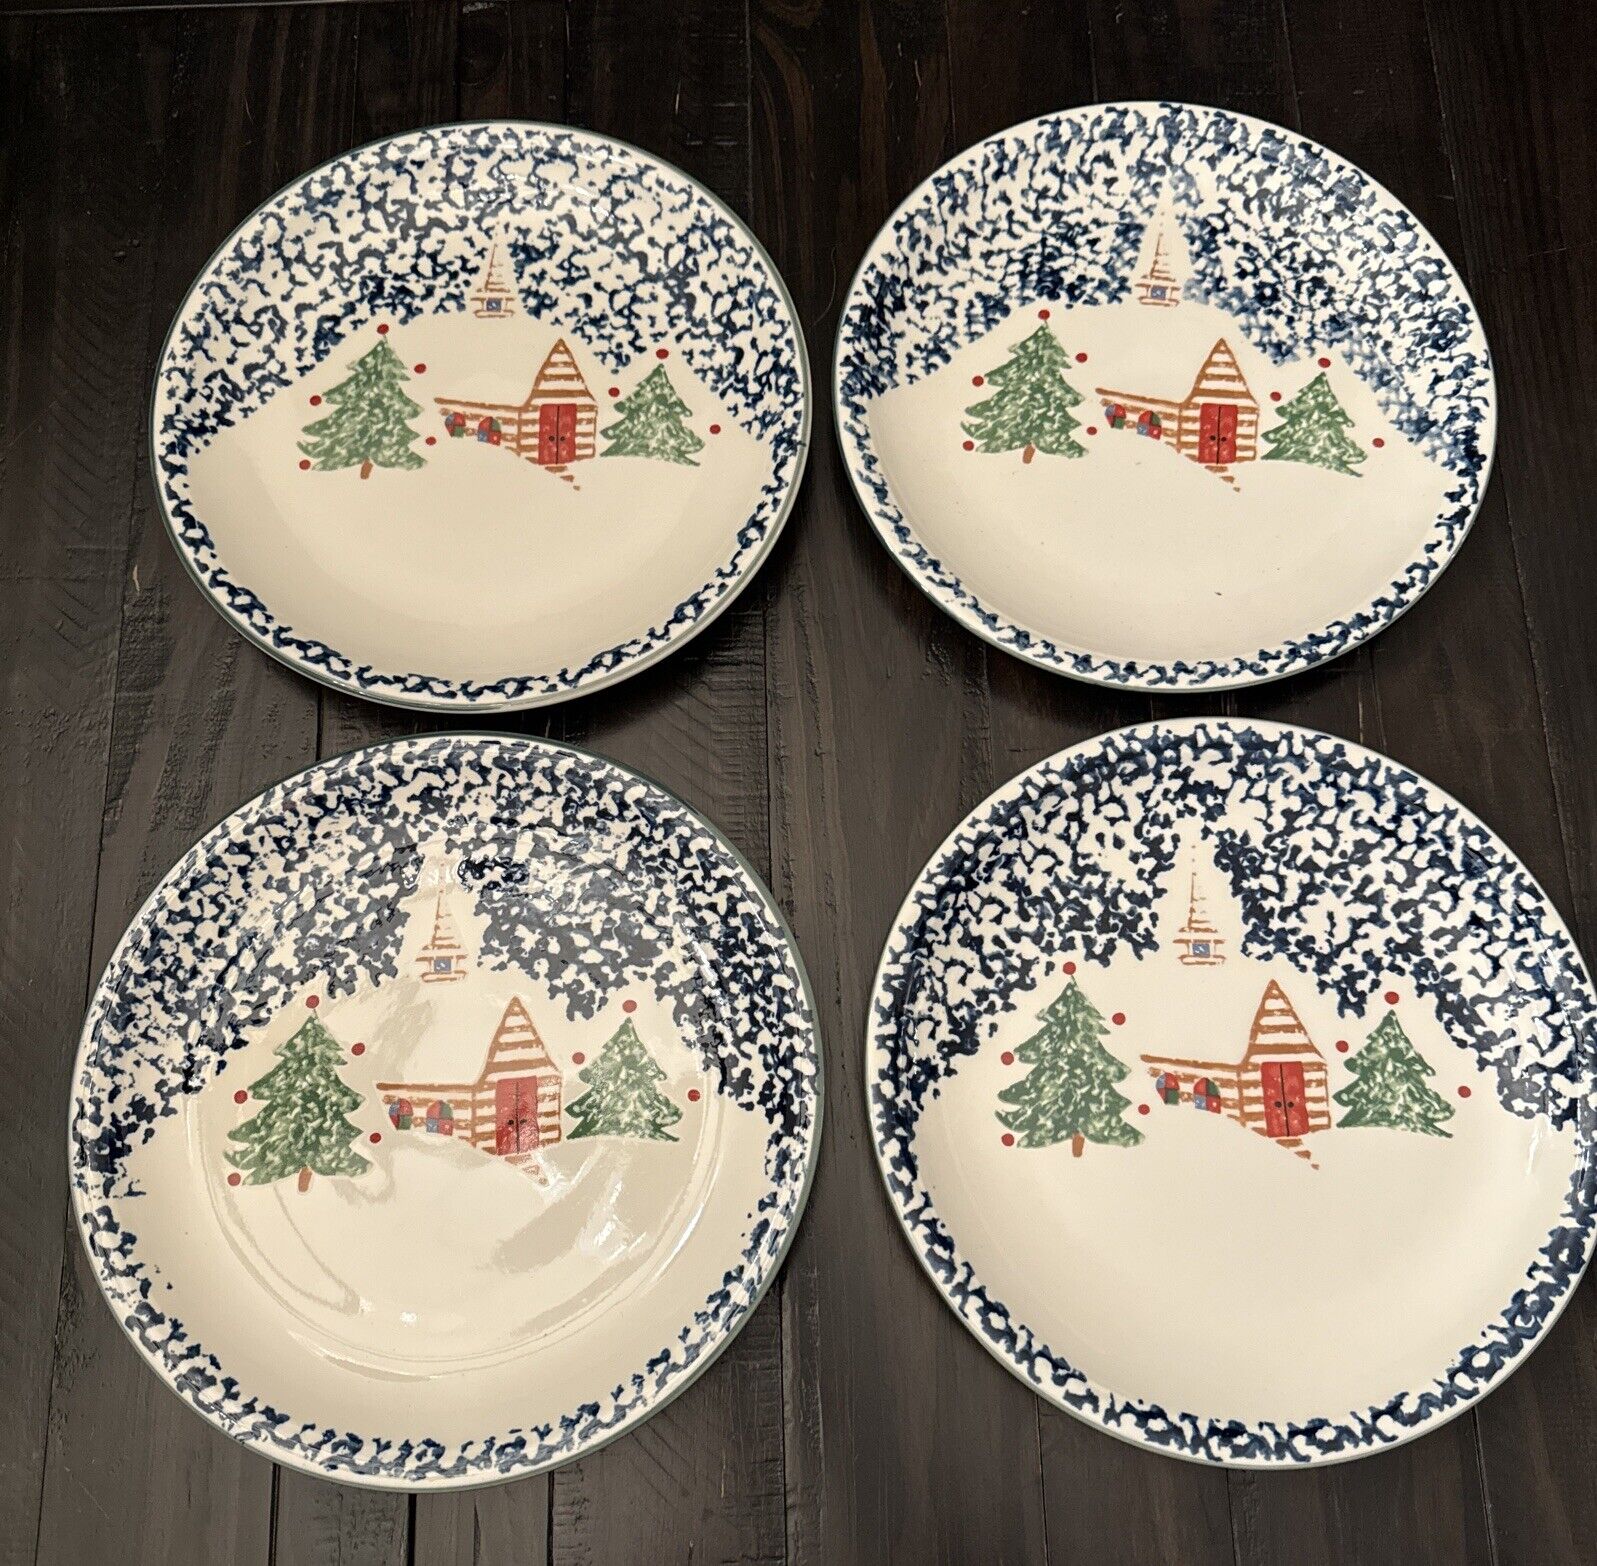 Vintage Tienshan Holiday Wilderness plates , 10 1/2" And 7 1/2” - Set Of 4